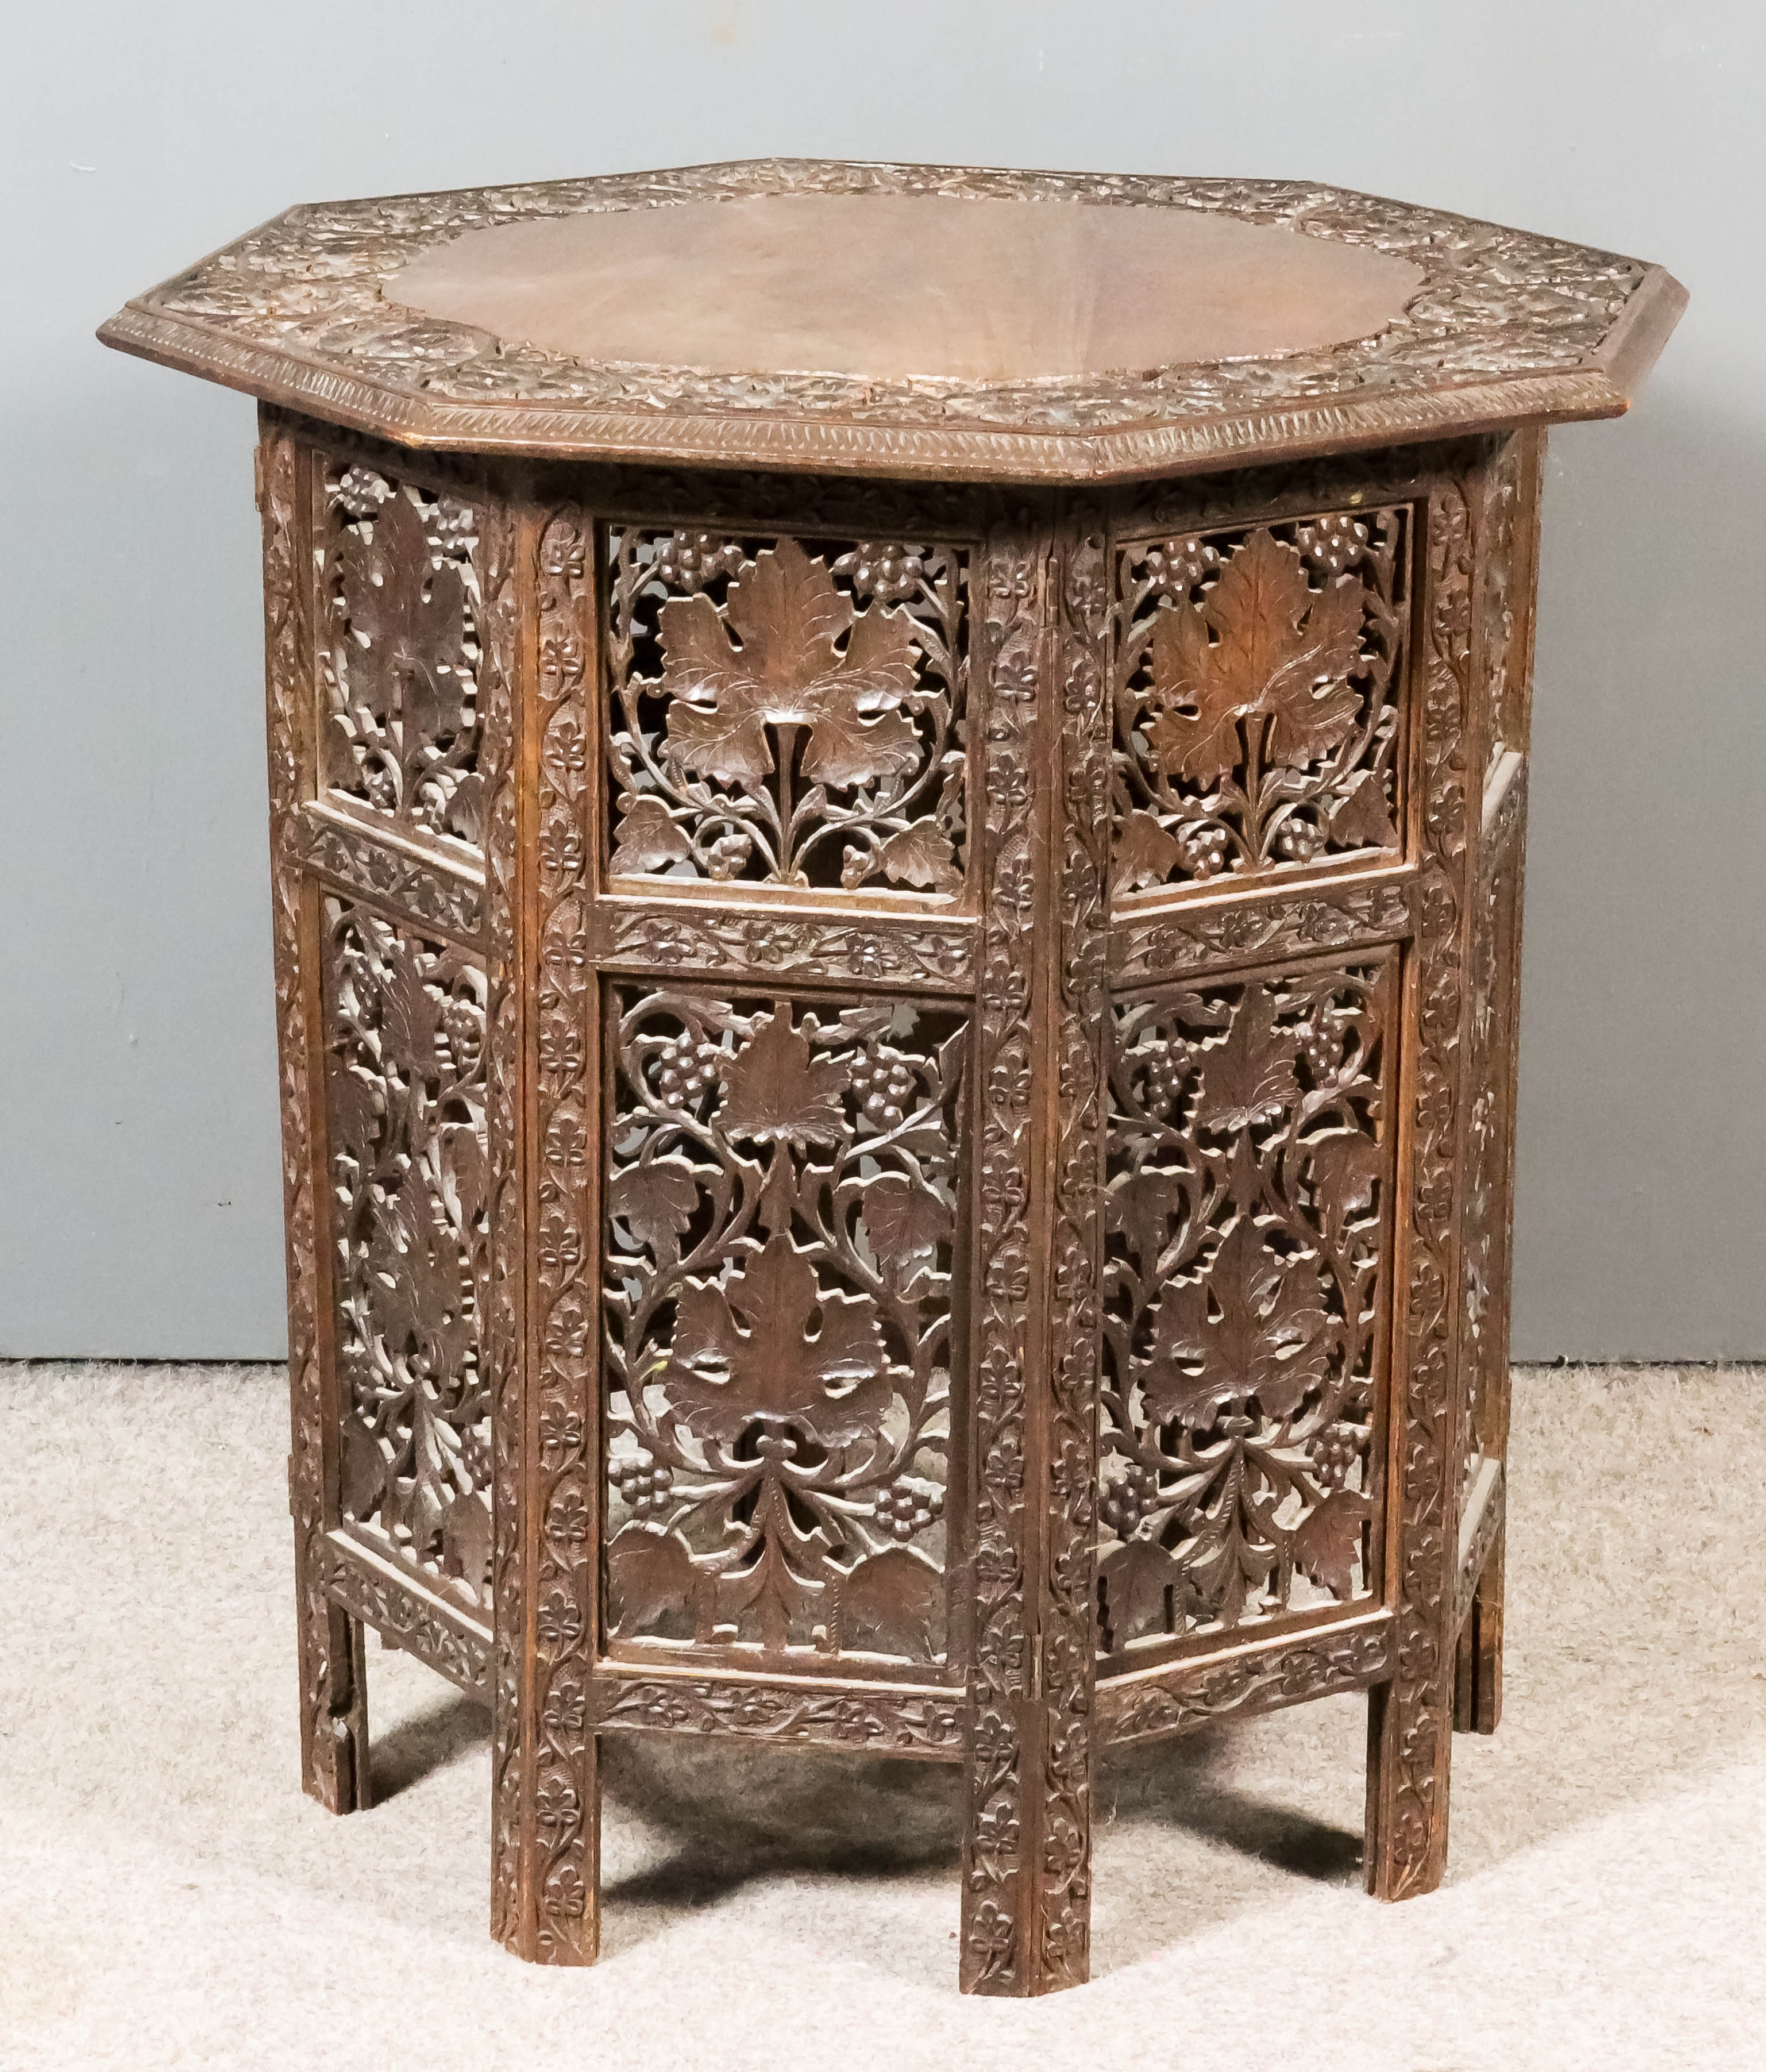 A Near Eastern Carved Wood Octagonal Occasional Table, the top carved with a band of fruiting vines,